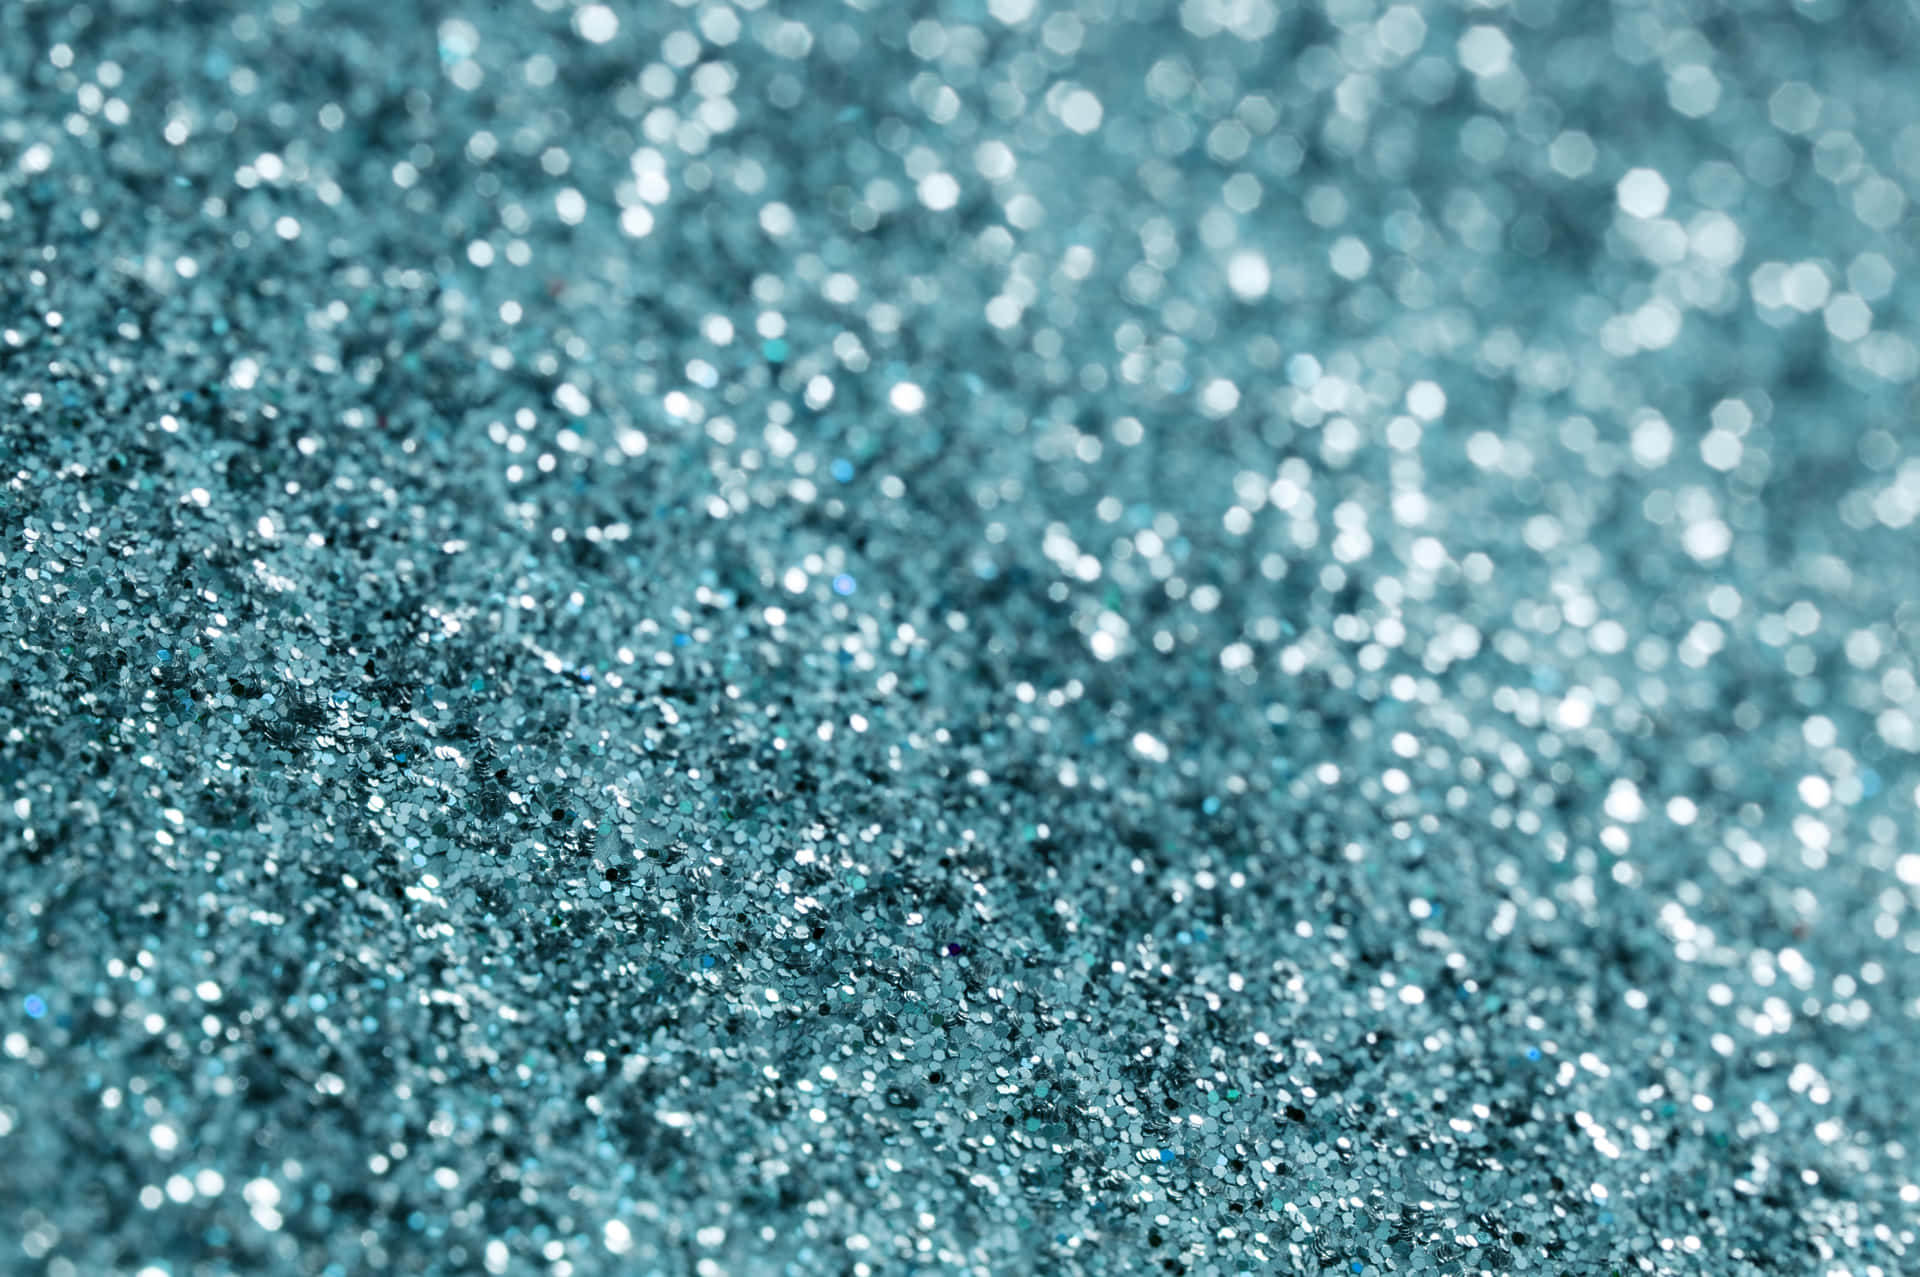 A vibrant teal glitter background.